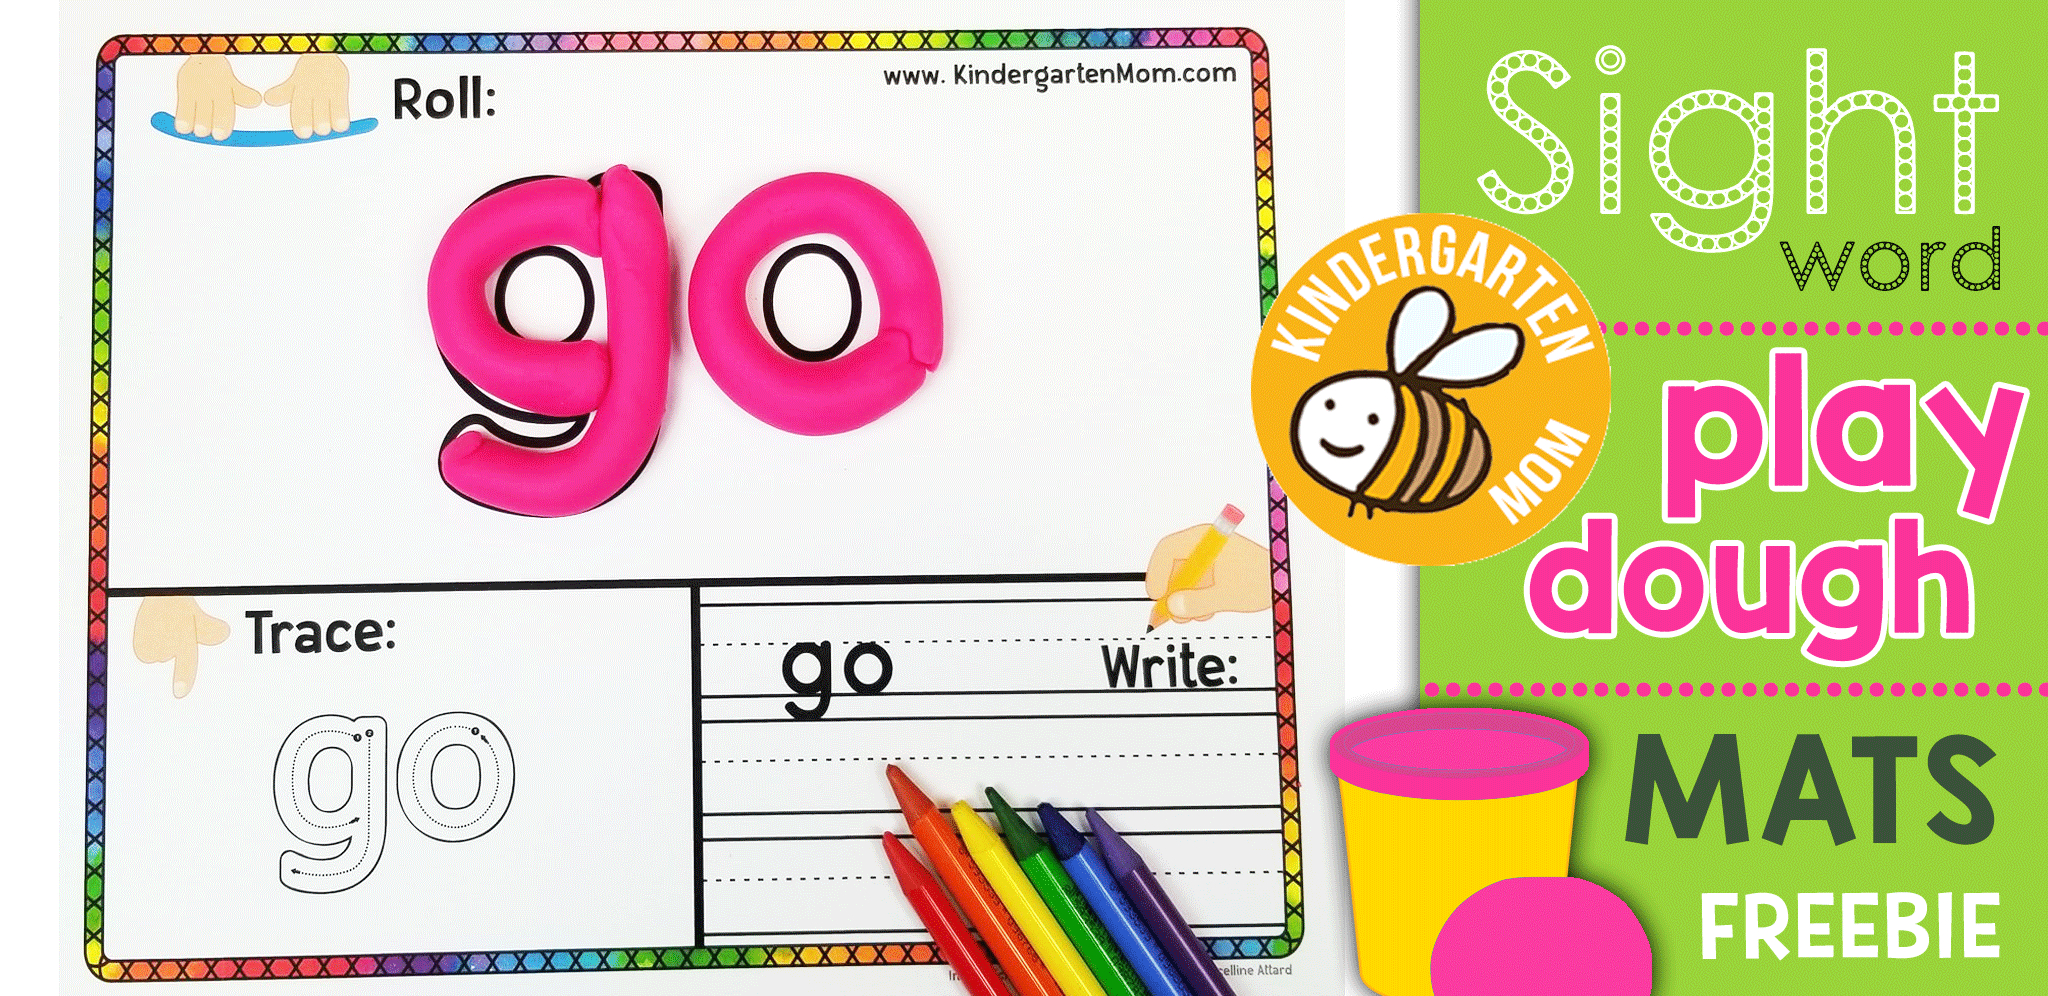 Sight Word Play Dough Mats - Kindergarten Mom for Tracing Letters With Playdough